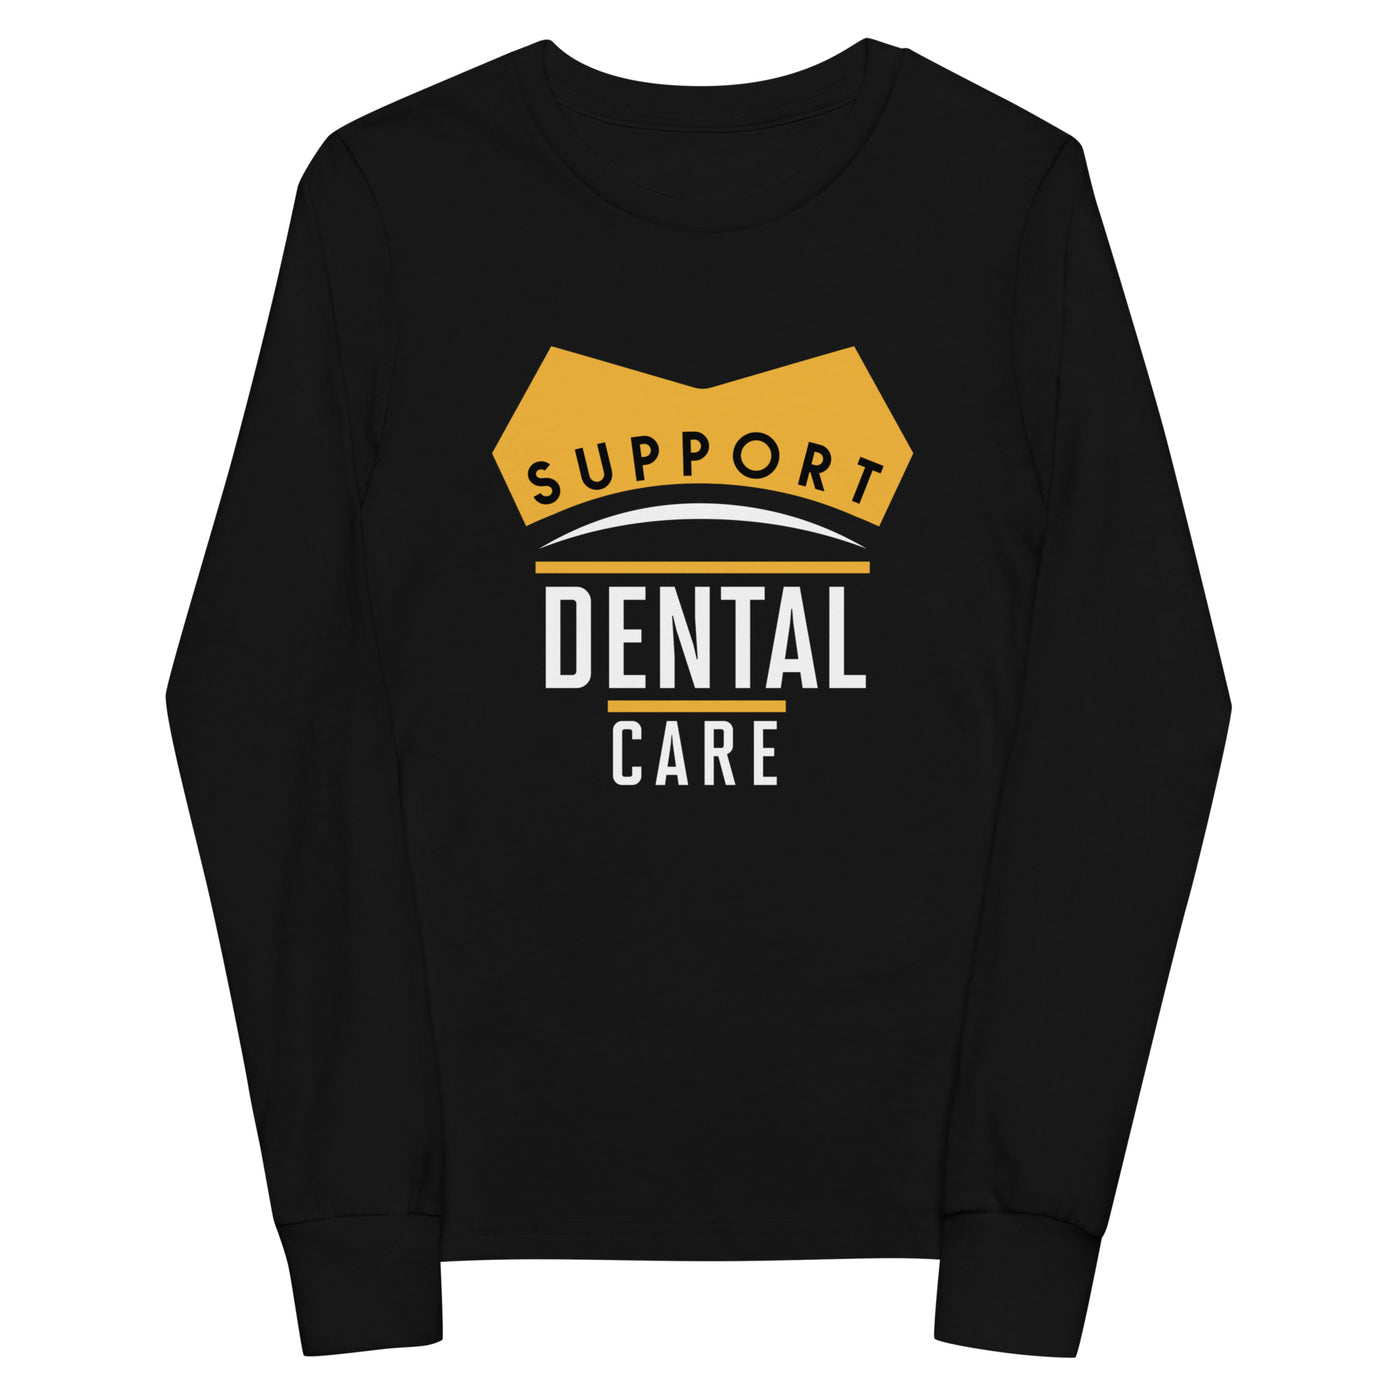 "Support Dental Care" Unisex Youth long sleeve tee